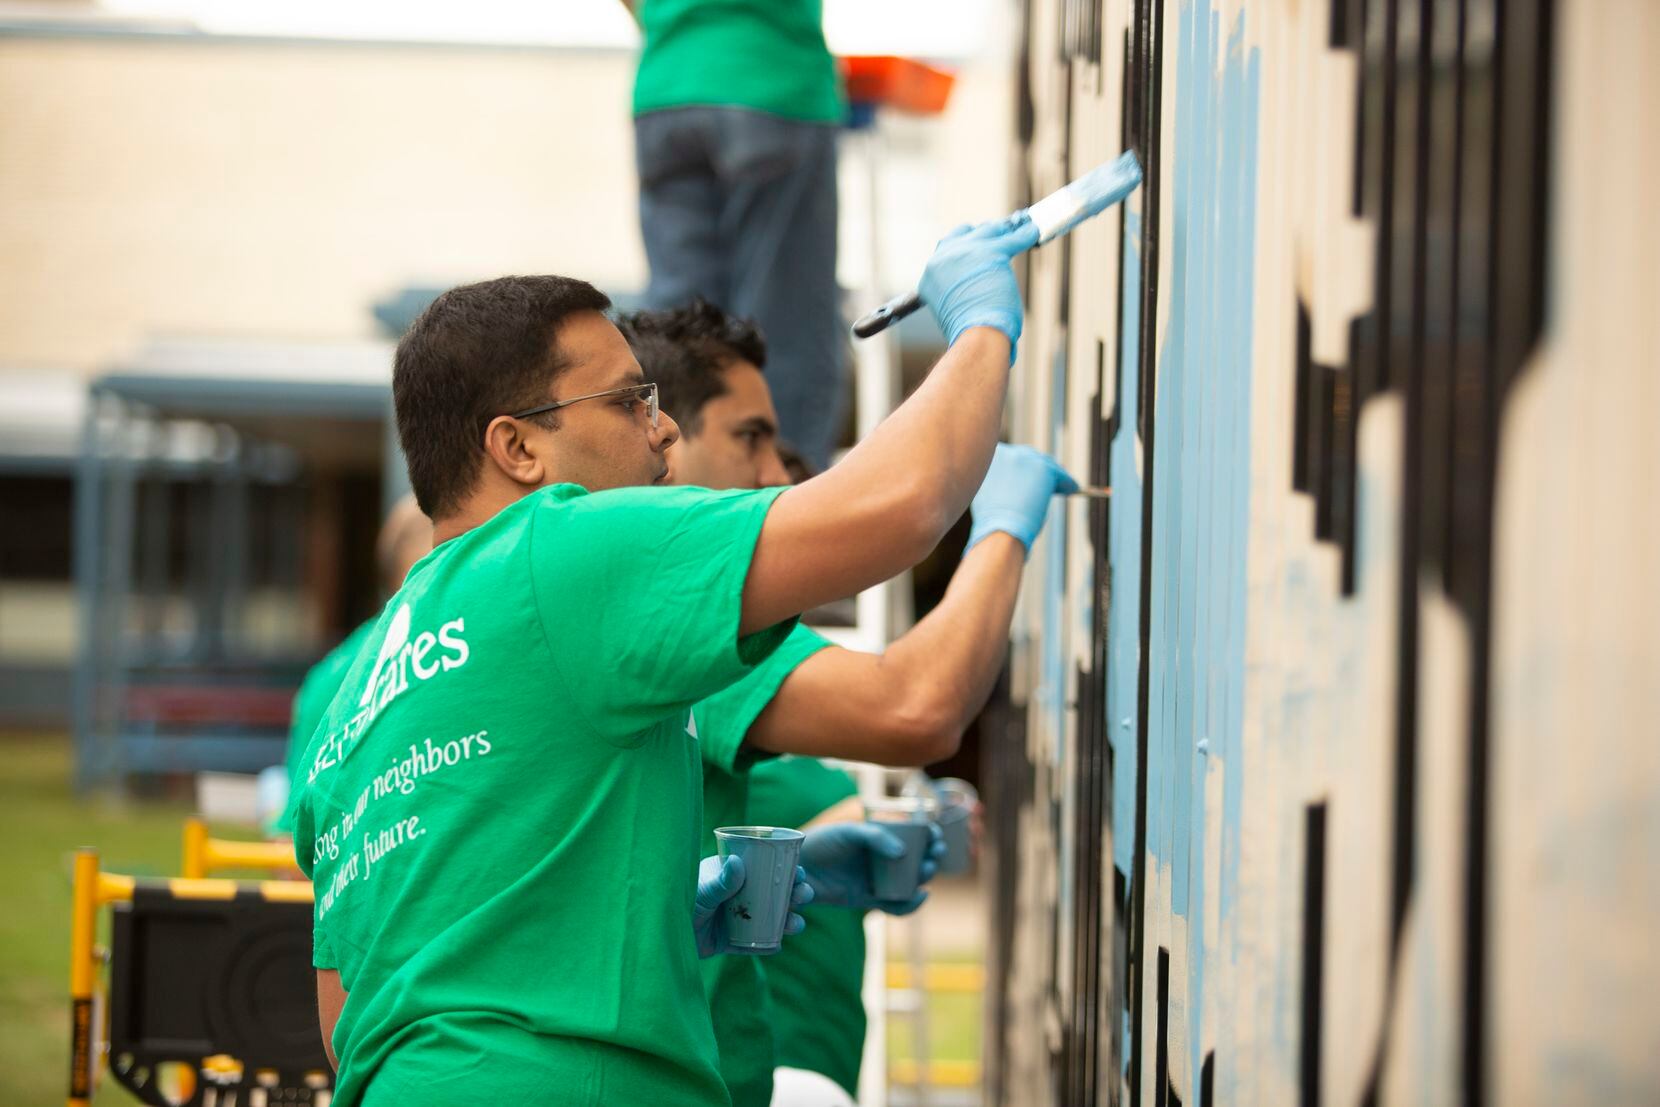 Fidelity Investments' workers have a history of volunteering at Thomas Jefferson High School.